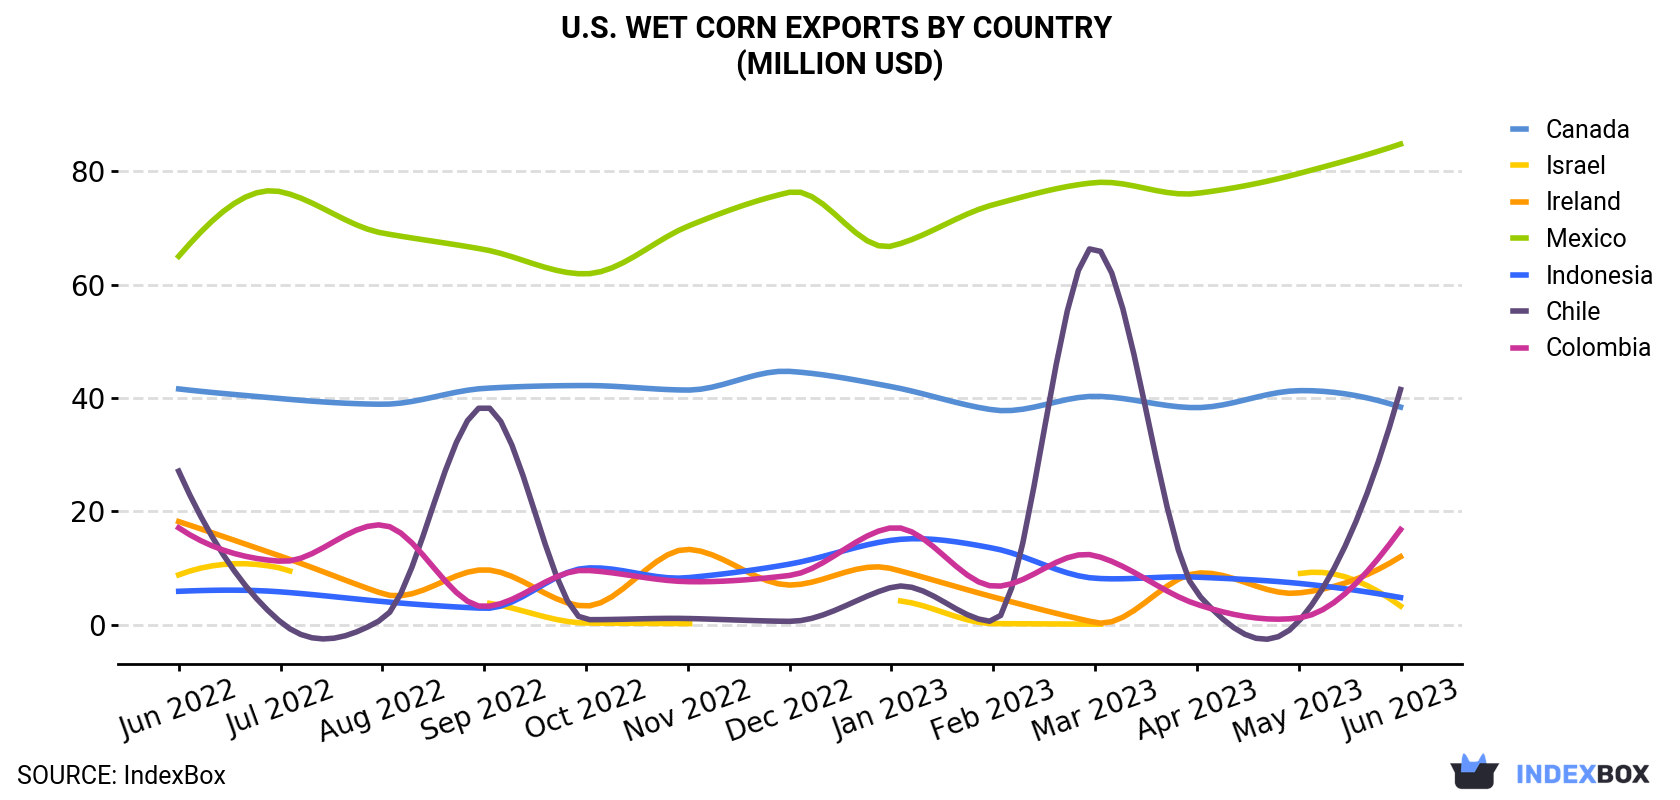 U.S. Wet Corn Exports By Country (Million USD)